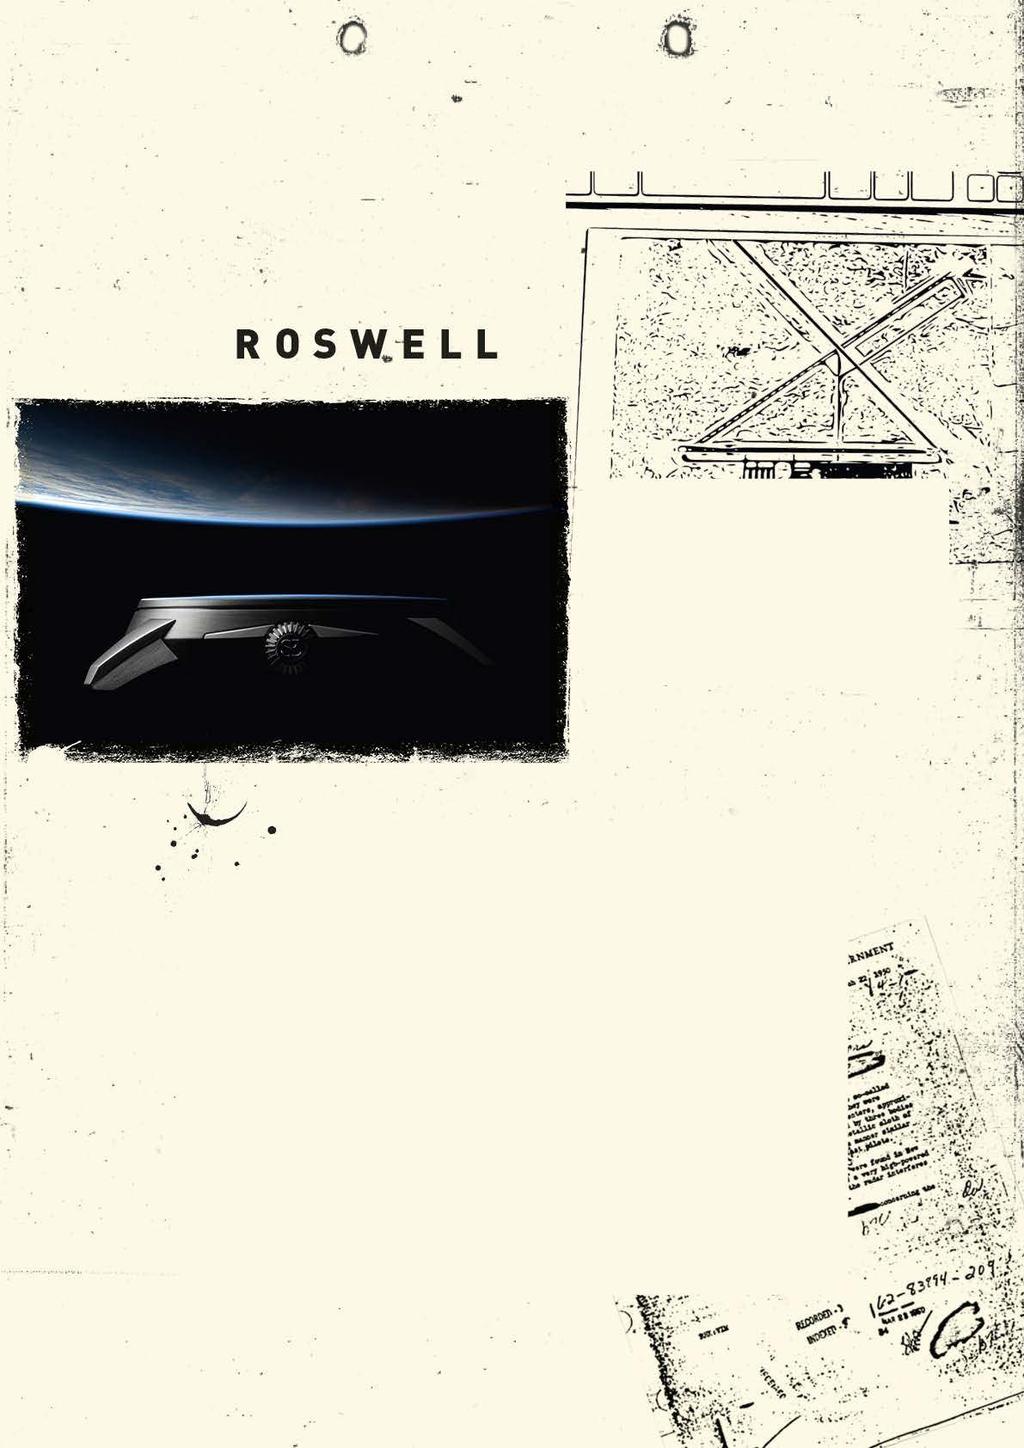 ROSWELL It all started with the desire to conquer every secret of watch movement, every unknown territory.